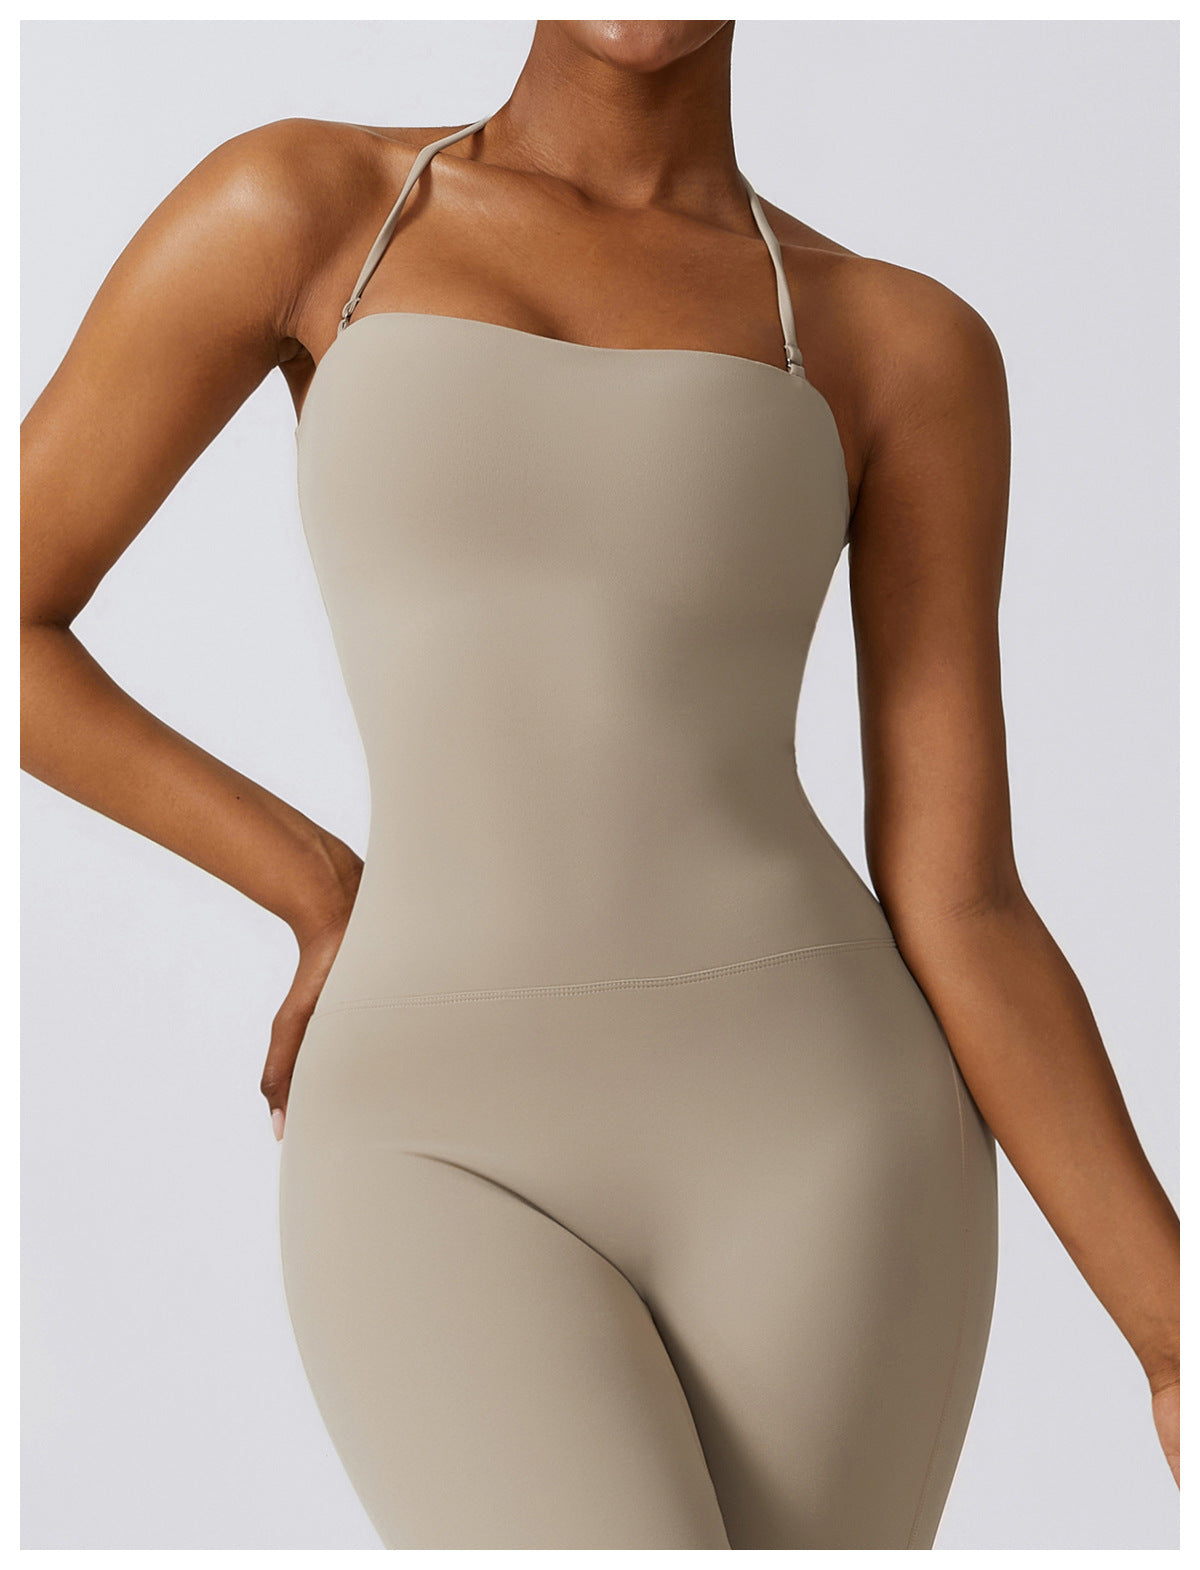 2023.09 Quick-drying tight bodysuit nude casual sports fitness suit dance micro La one-piece yoga suit 8393